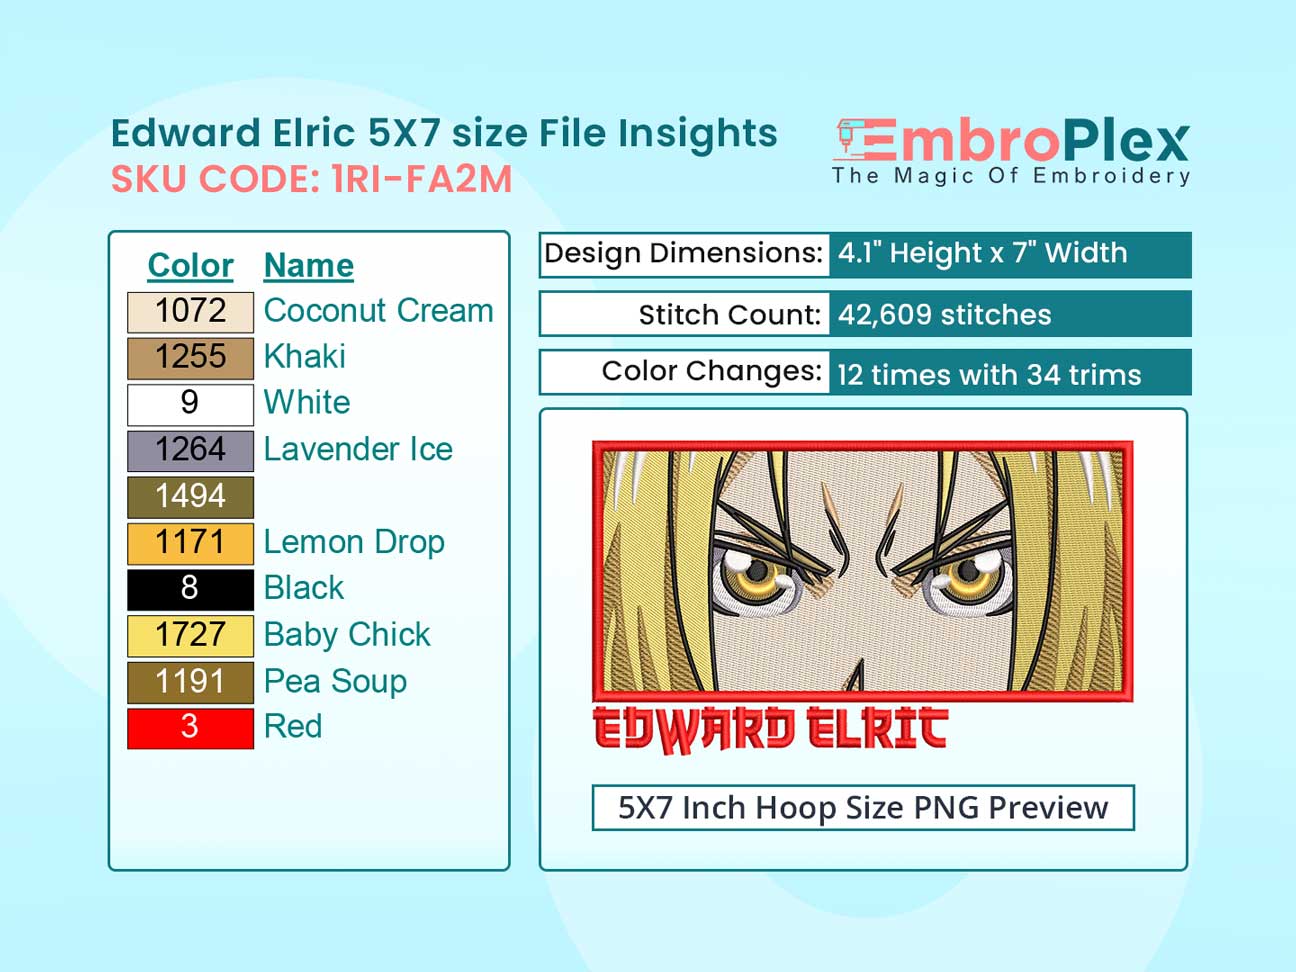 Anime-Inspired Edward Elric Embroidery Design File - 5x7 Inch hoop Size Variation overview image